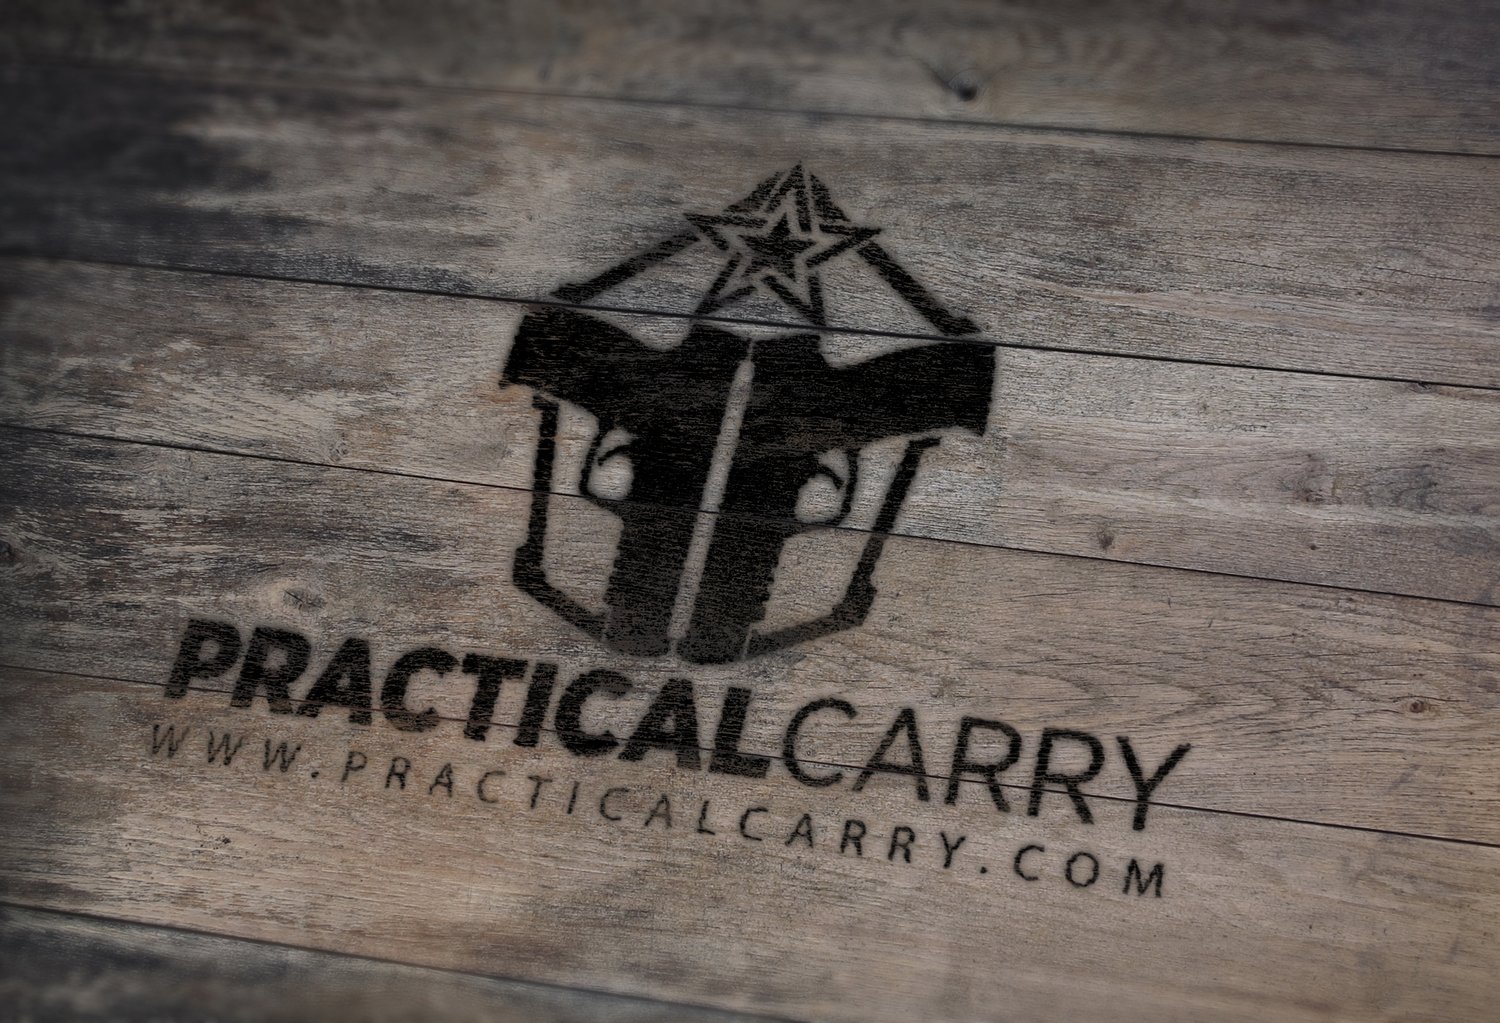 Practical Carry Firearms Instruction